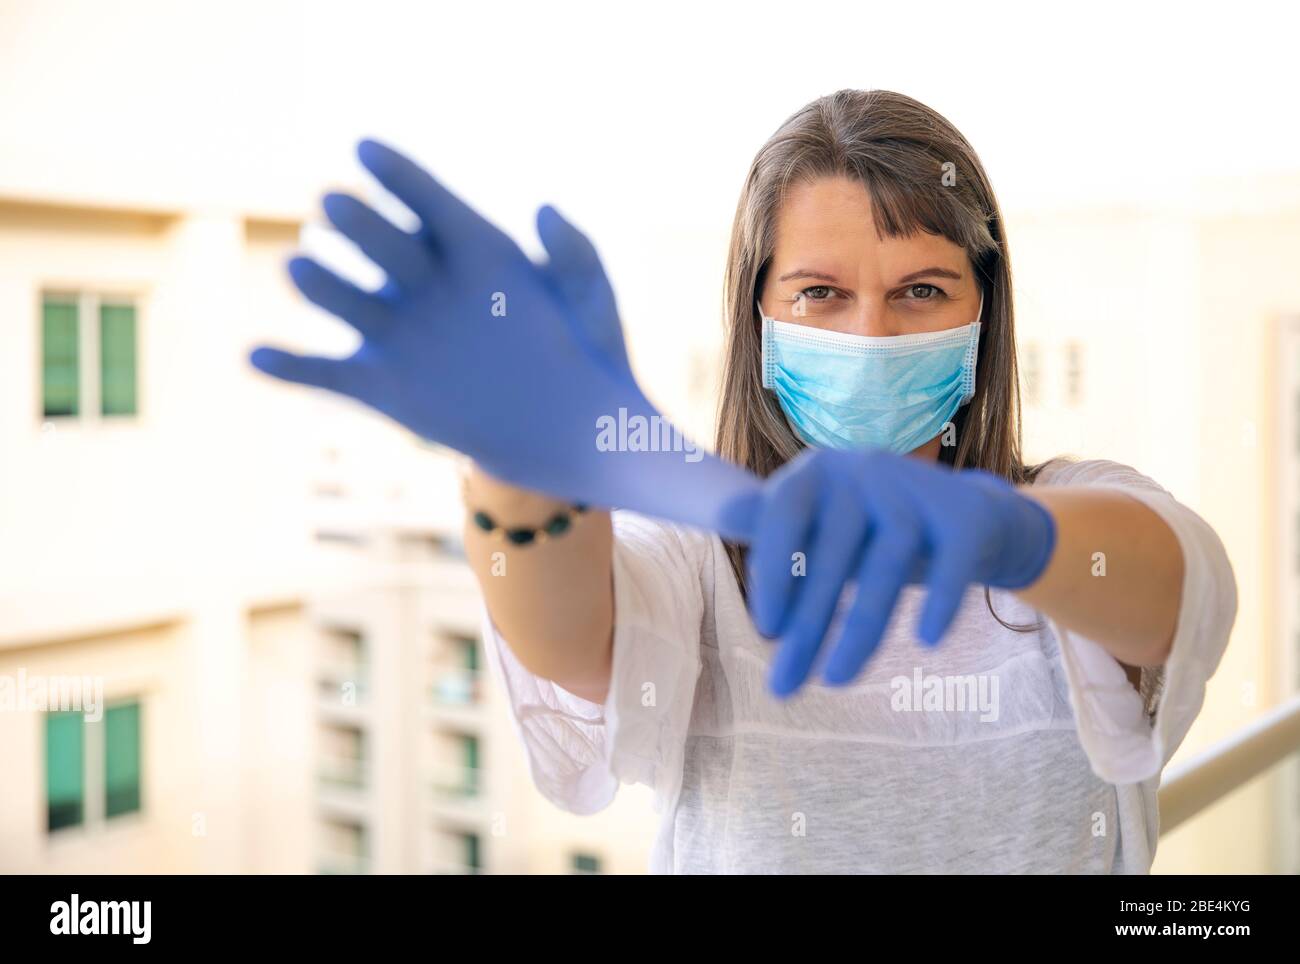 middle aged woman wearing face mask and rubber gloves during a virus outbreak Stock Photo